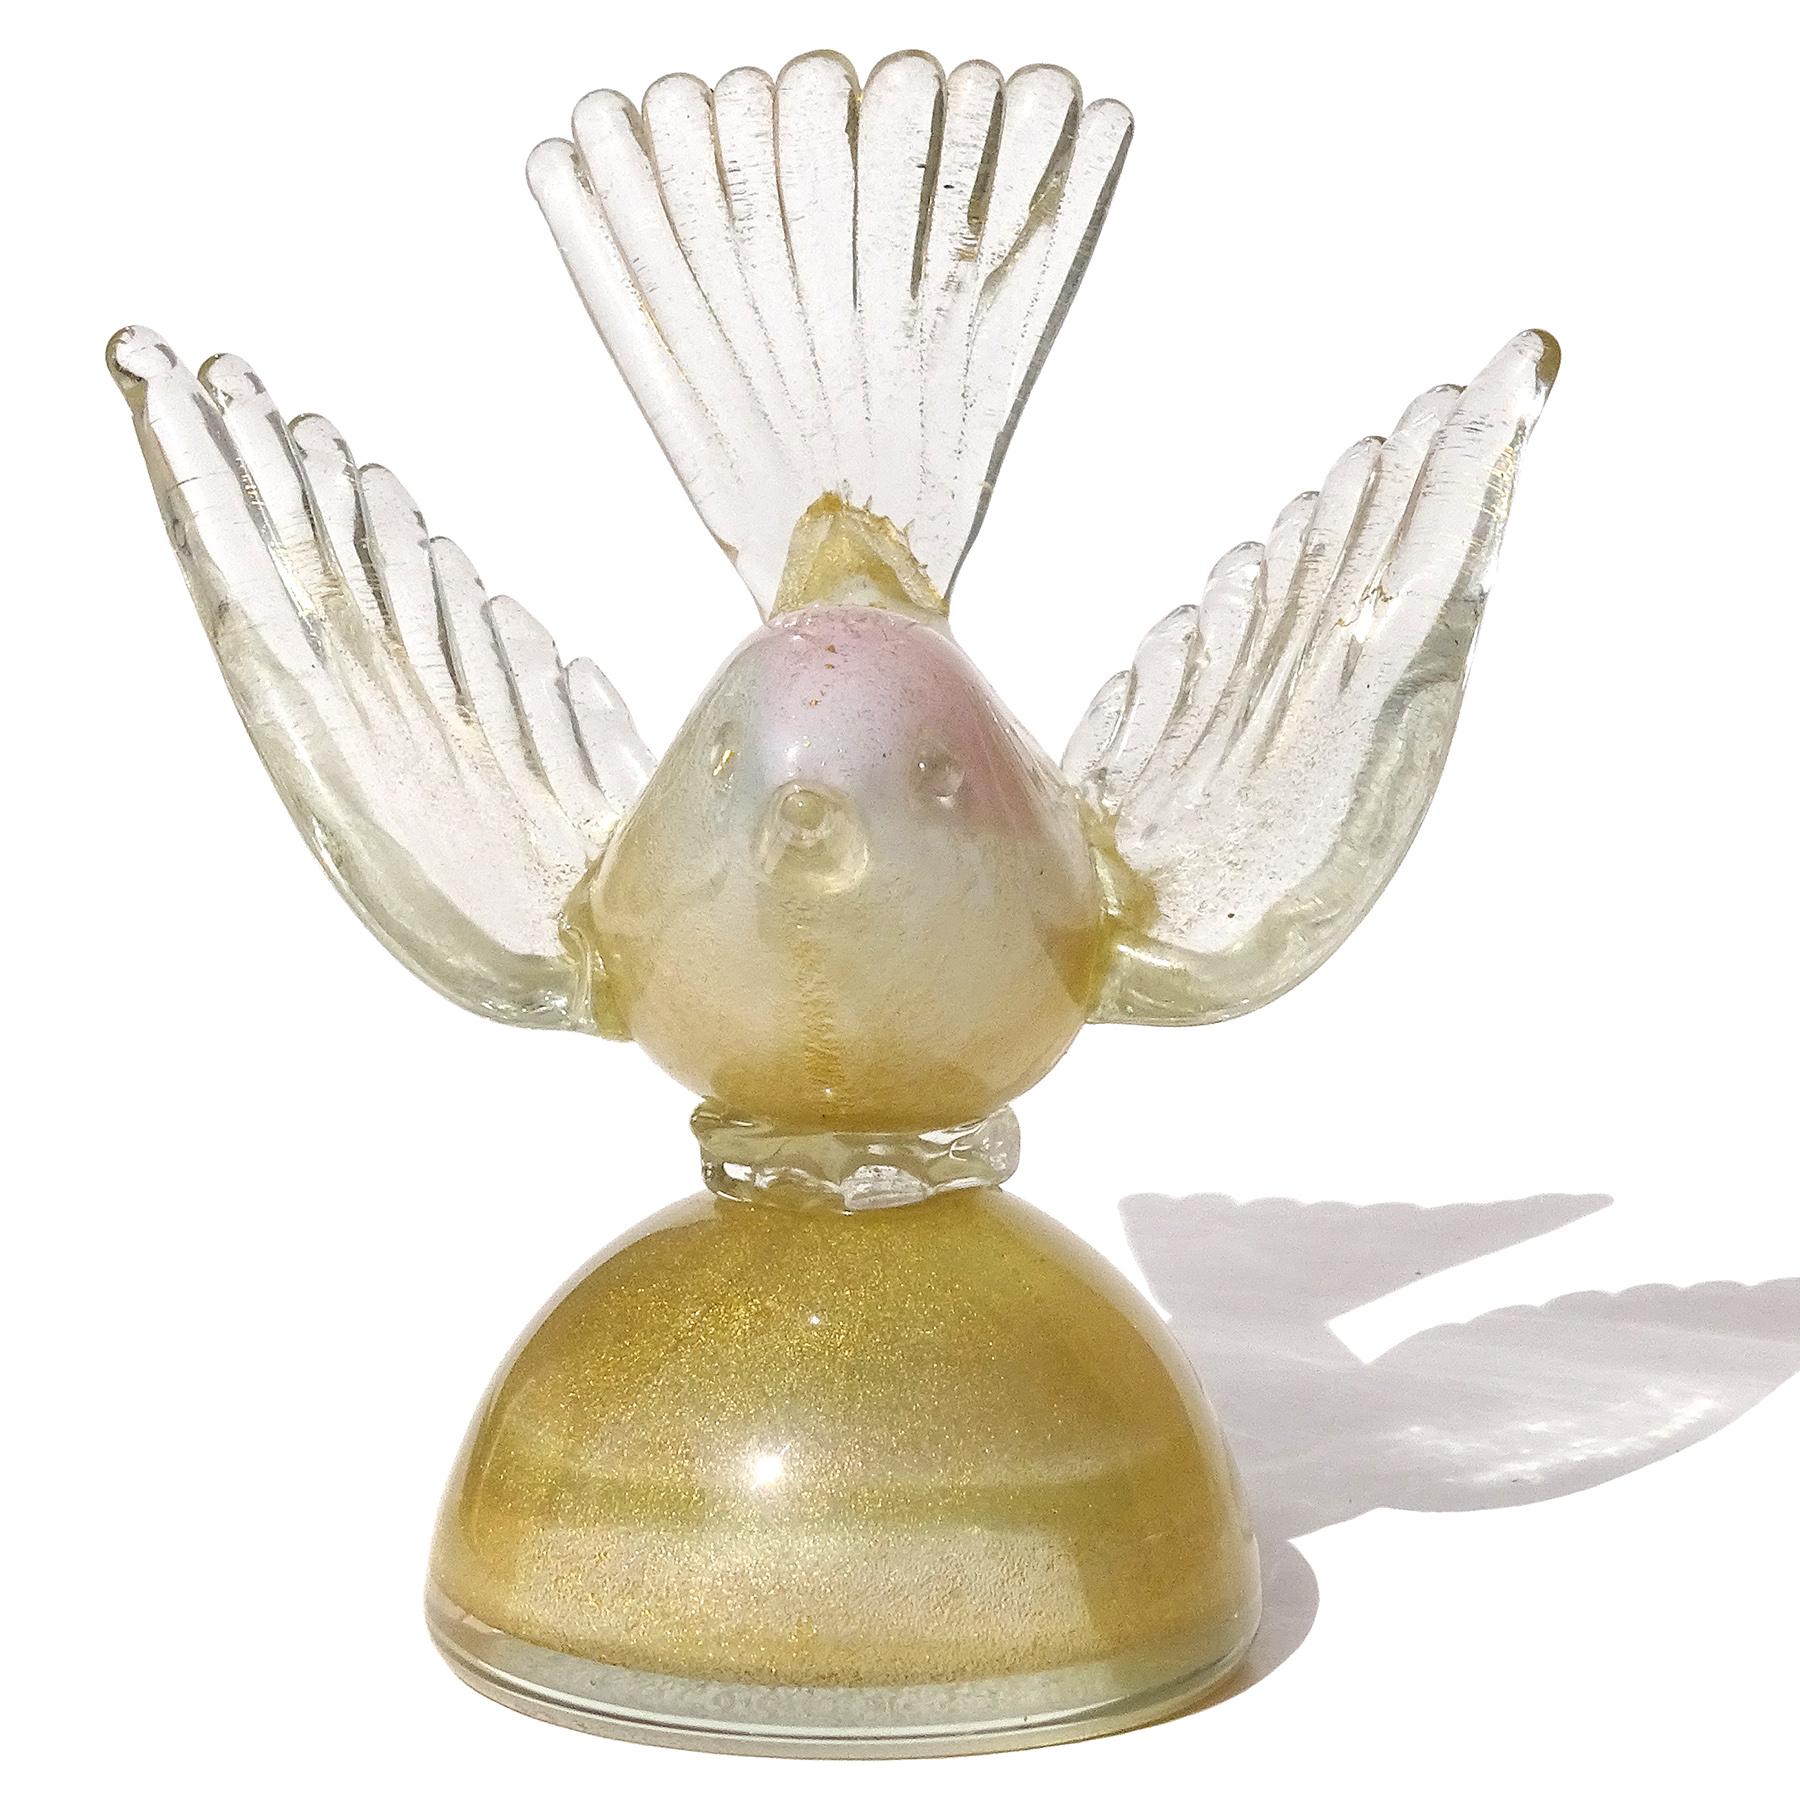 Beautiful vintage Murano hand blown white, pink and gold flecks Italian art glass bird on base figurine, paperweight. Documented to designer Alfredo Barbini, circa 1950-60s. The bird has a pink color spot on the top of its head which is unusual. I